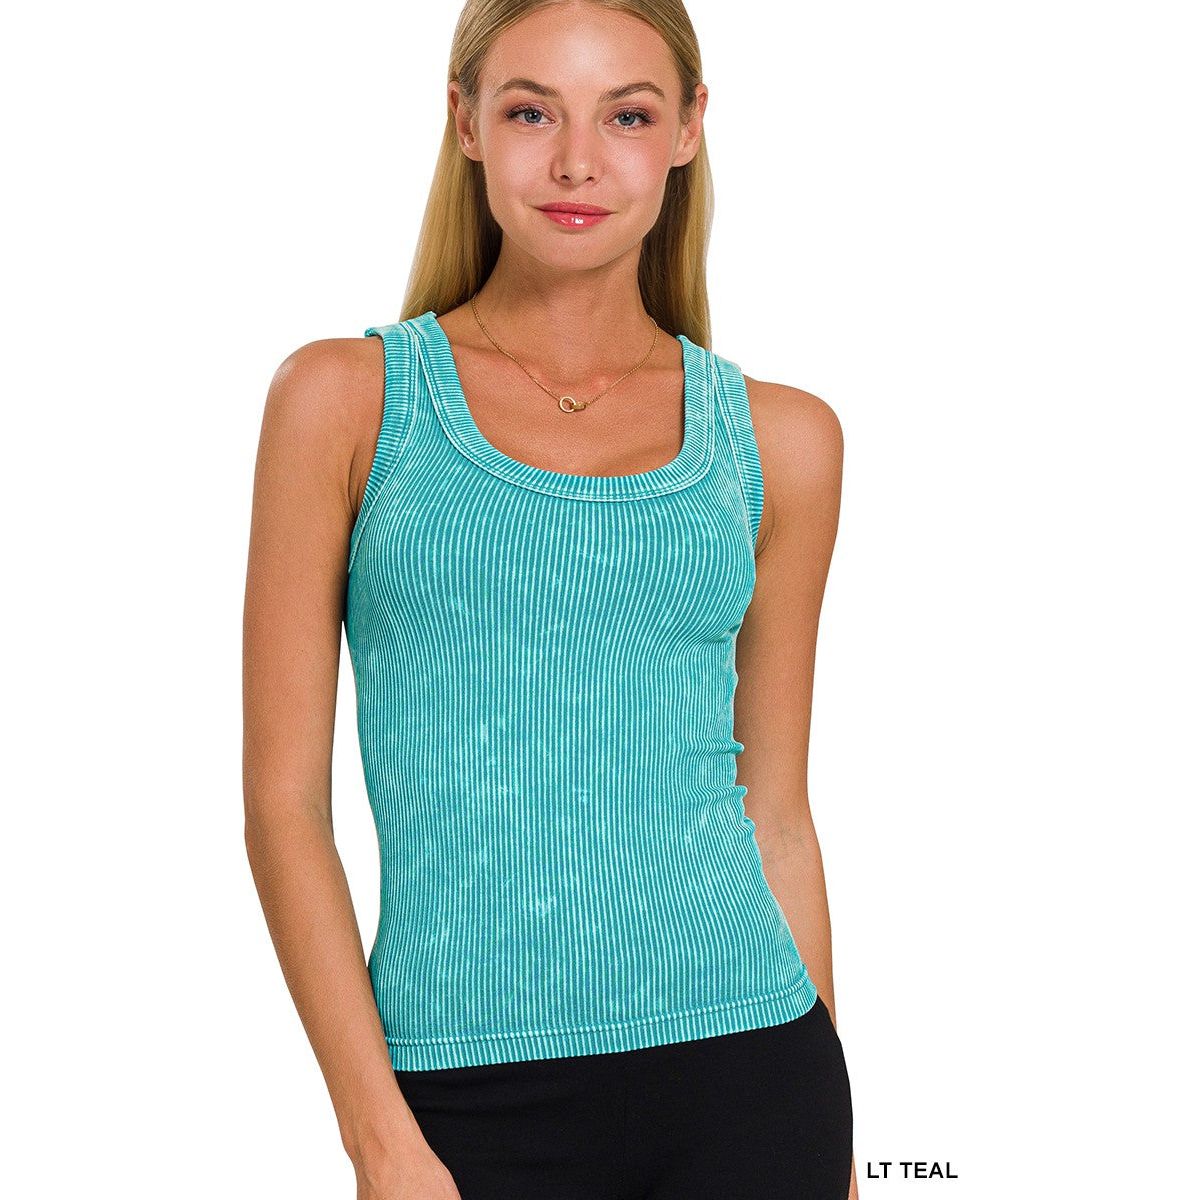 Suck you in Stretchy Tank Top Teal